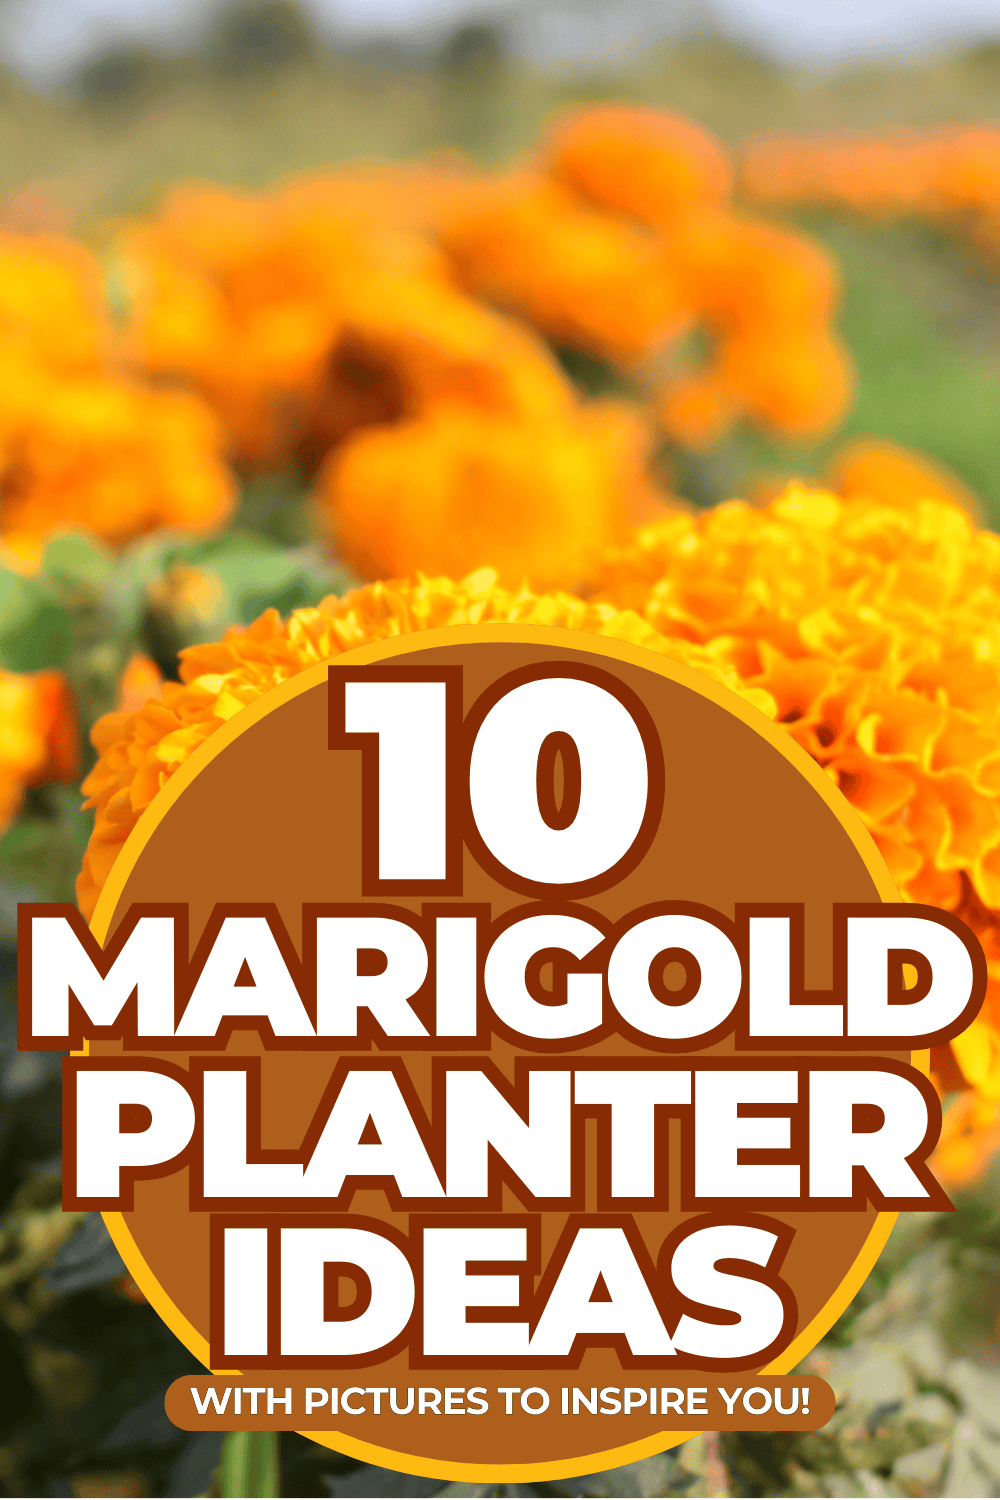 10 Marigold Planter Ideas [With Pictures To Inspire You!]